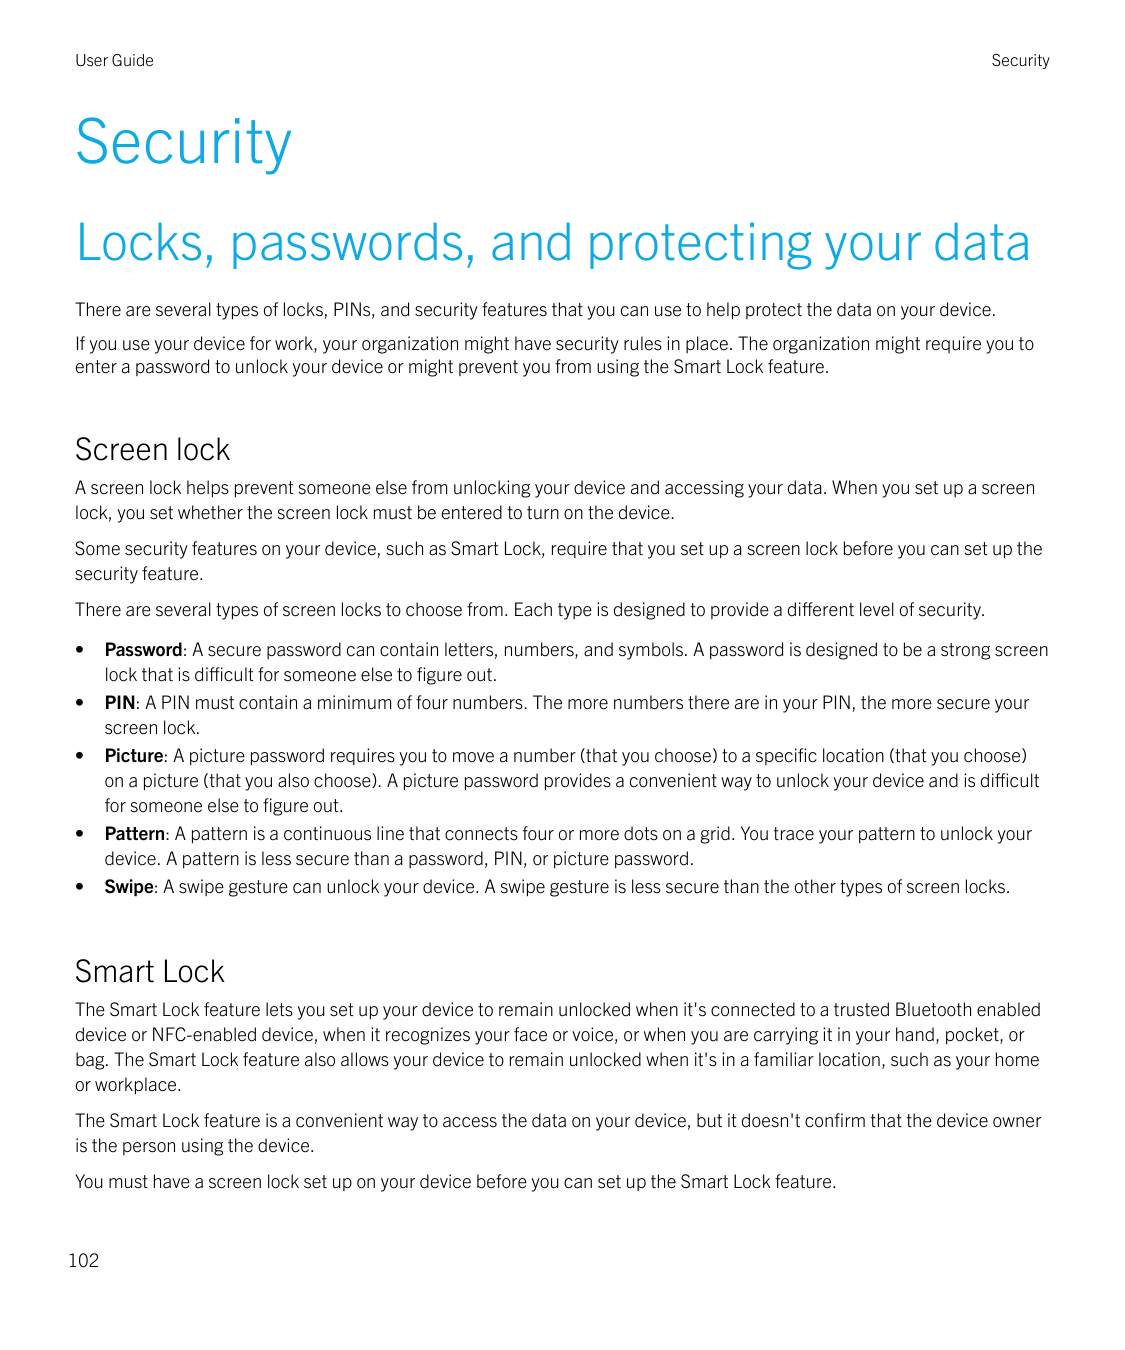 User GuideSecuritySecurityLocks, passwords, and protecting your dataThere are several types of locks, PINs, and security feature